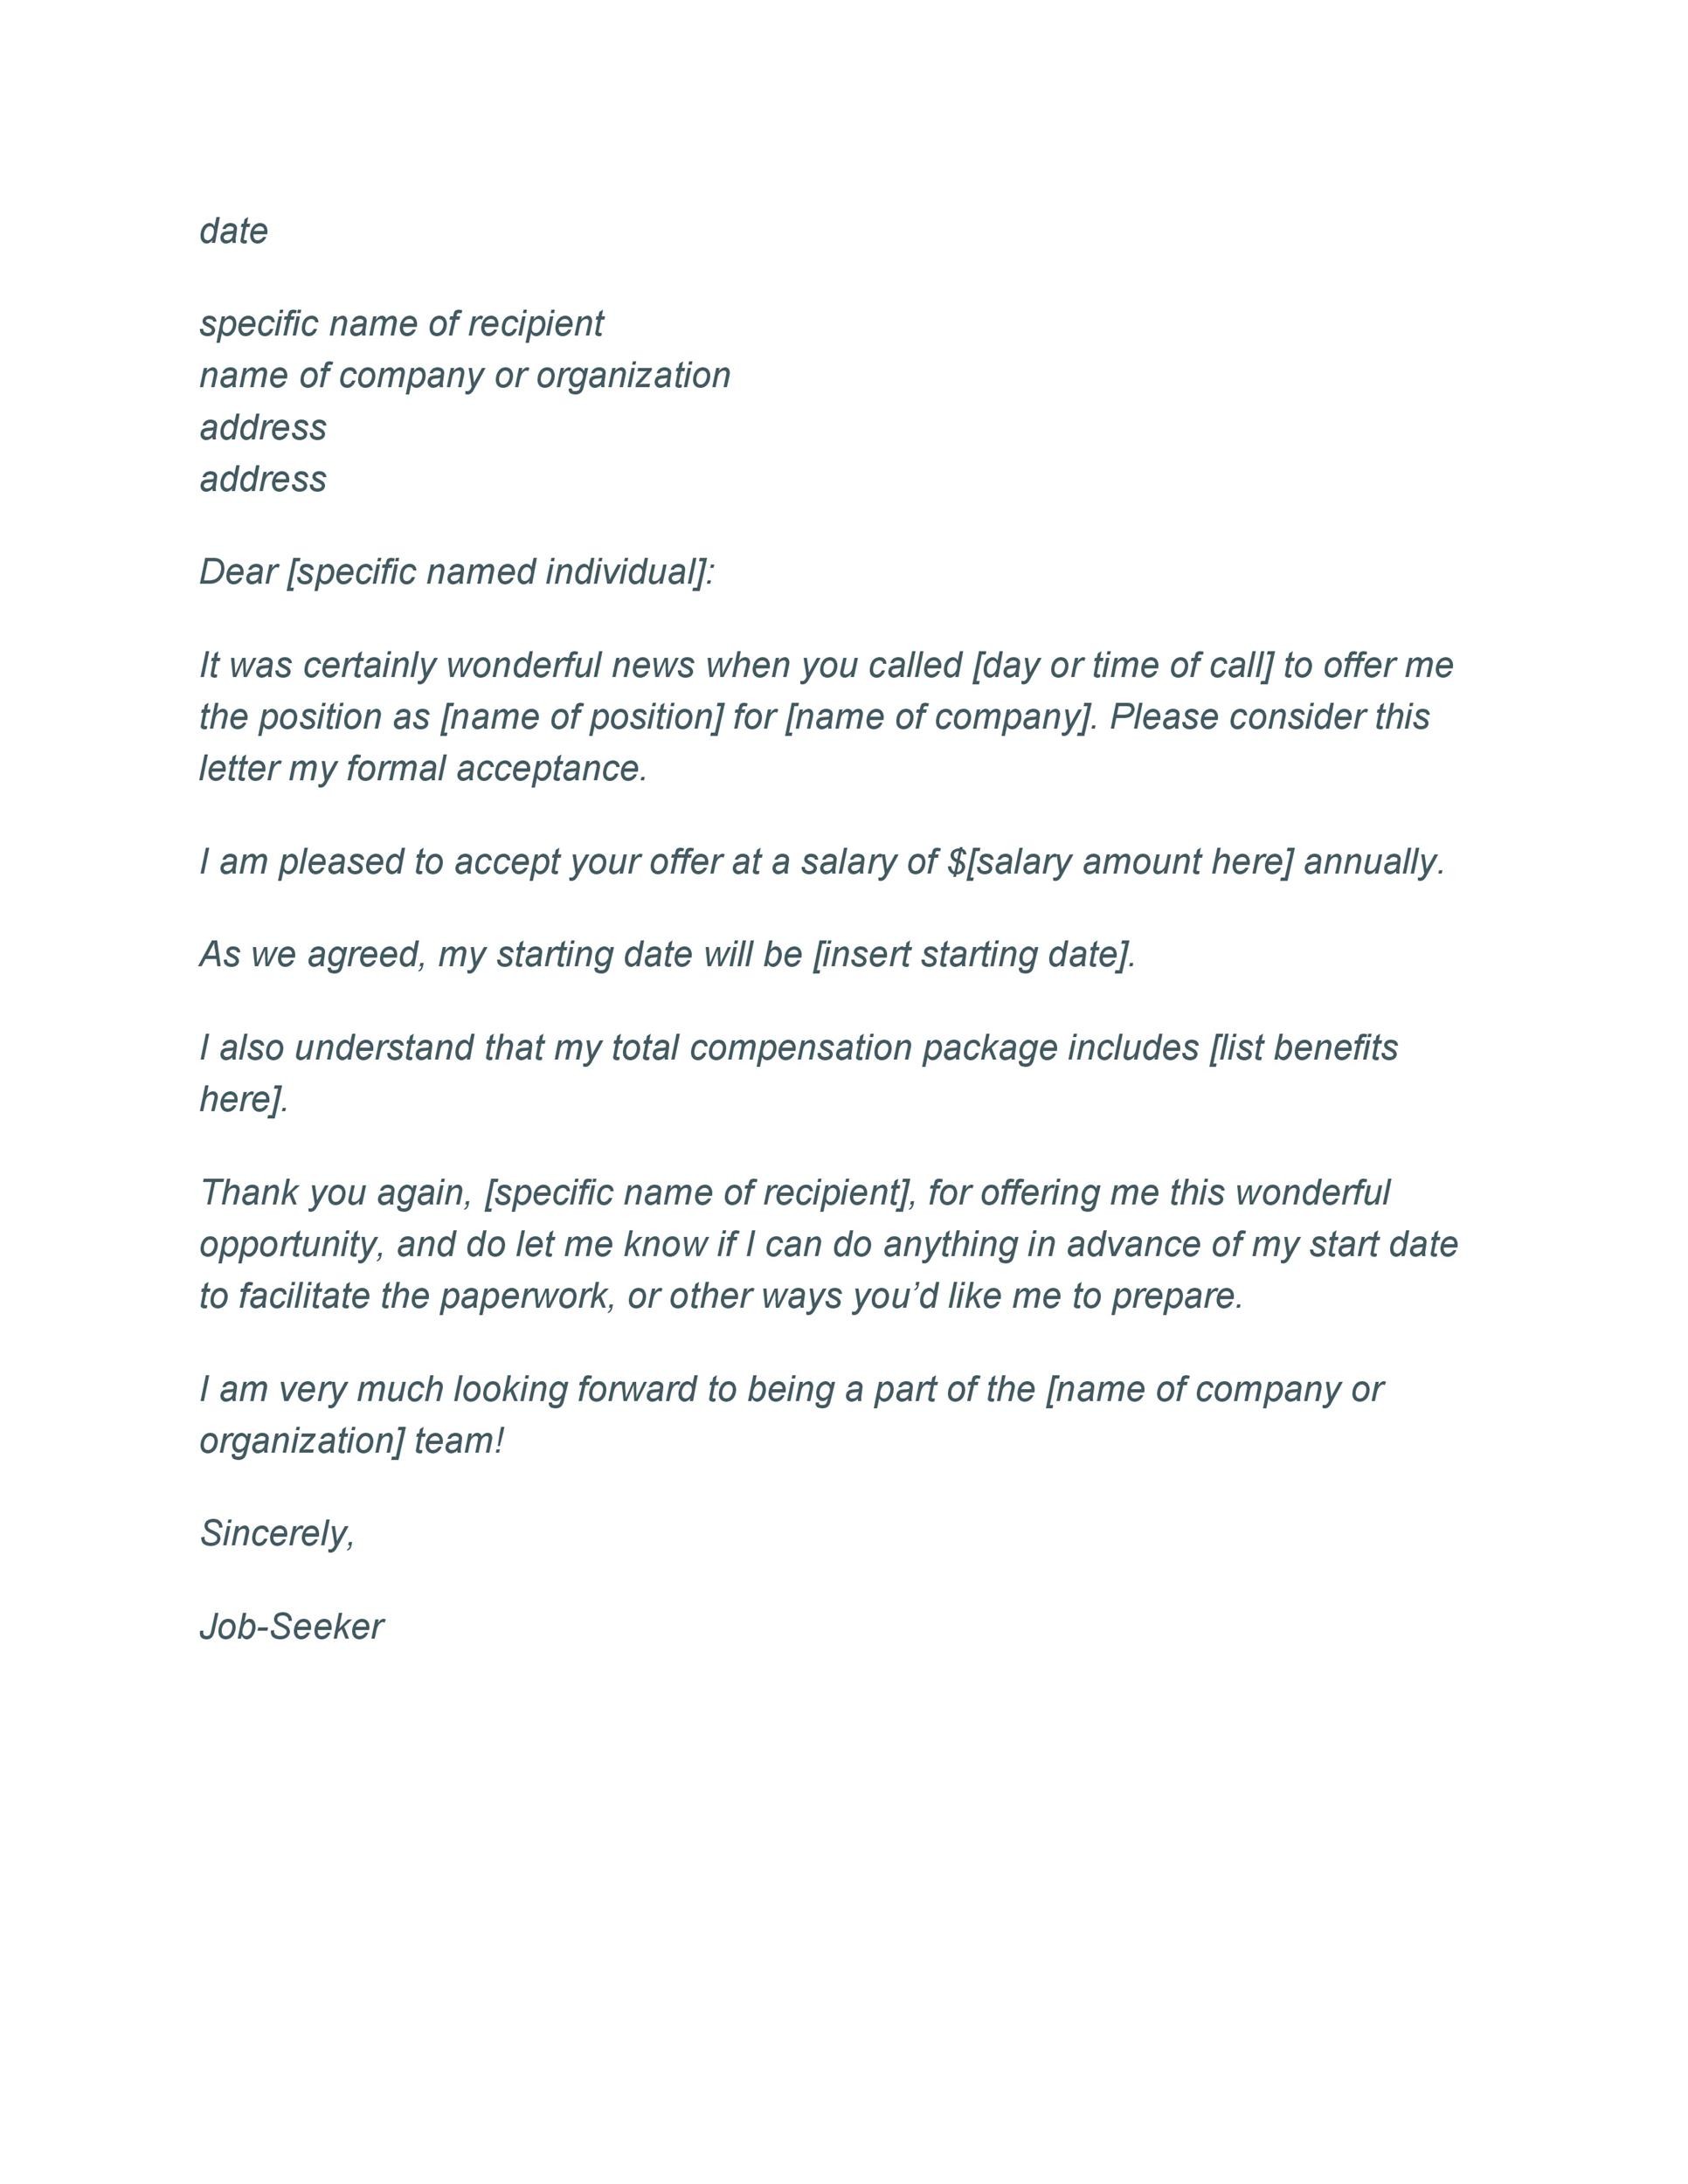 40 Professional Job Offer Acceptance Letter & Email Templates ᐅ TemplateLab